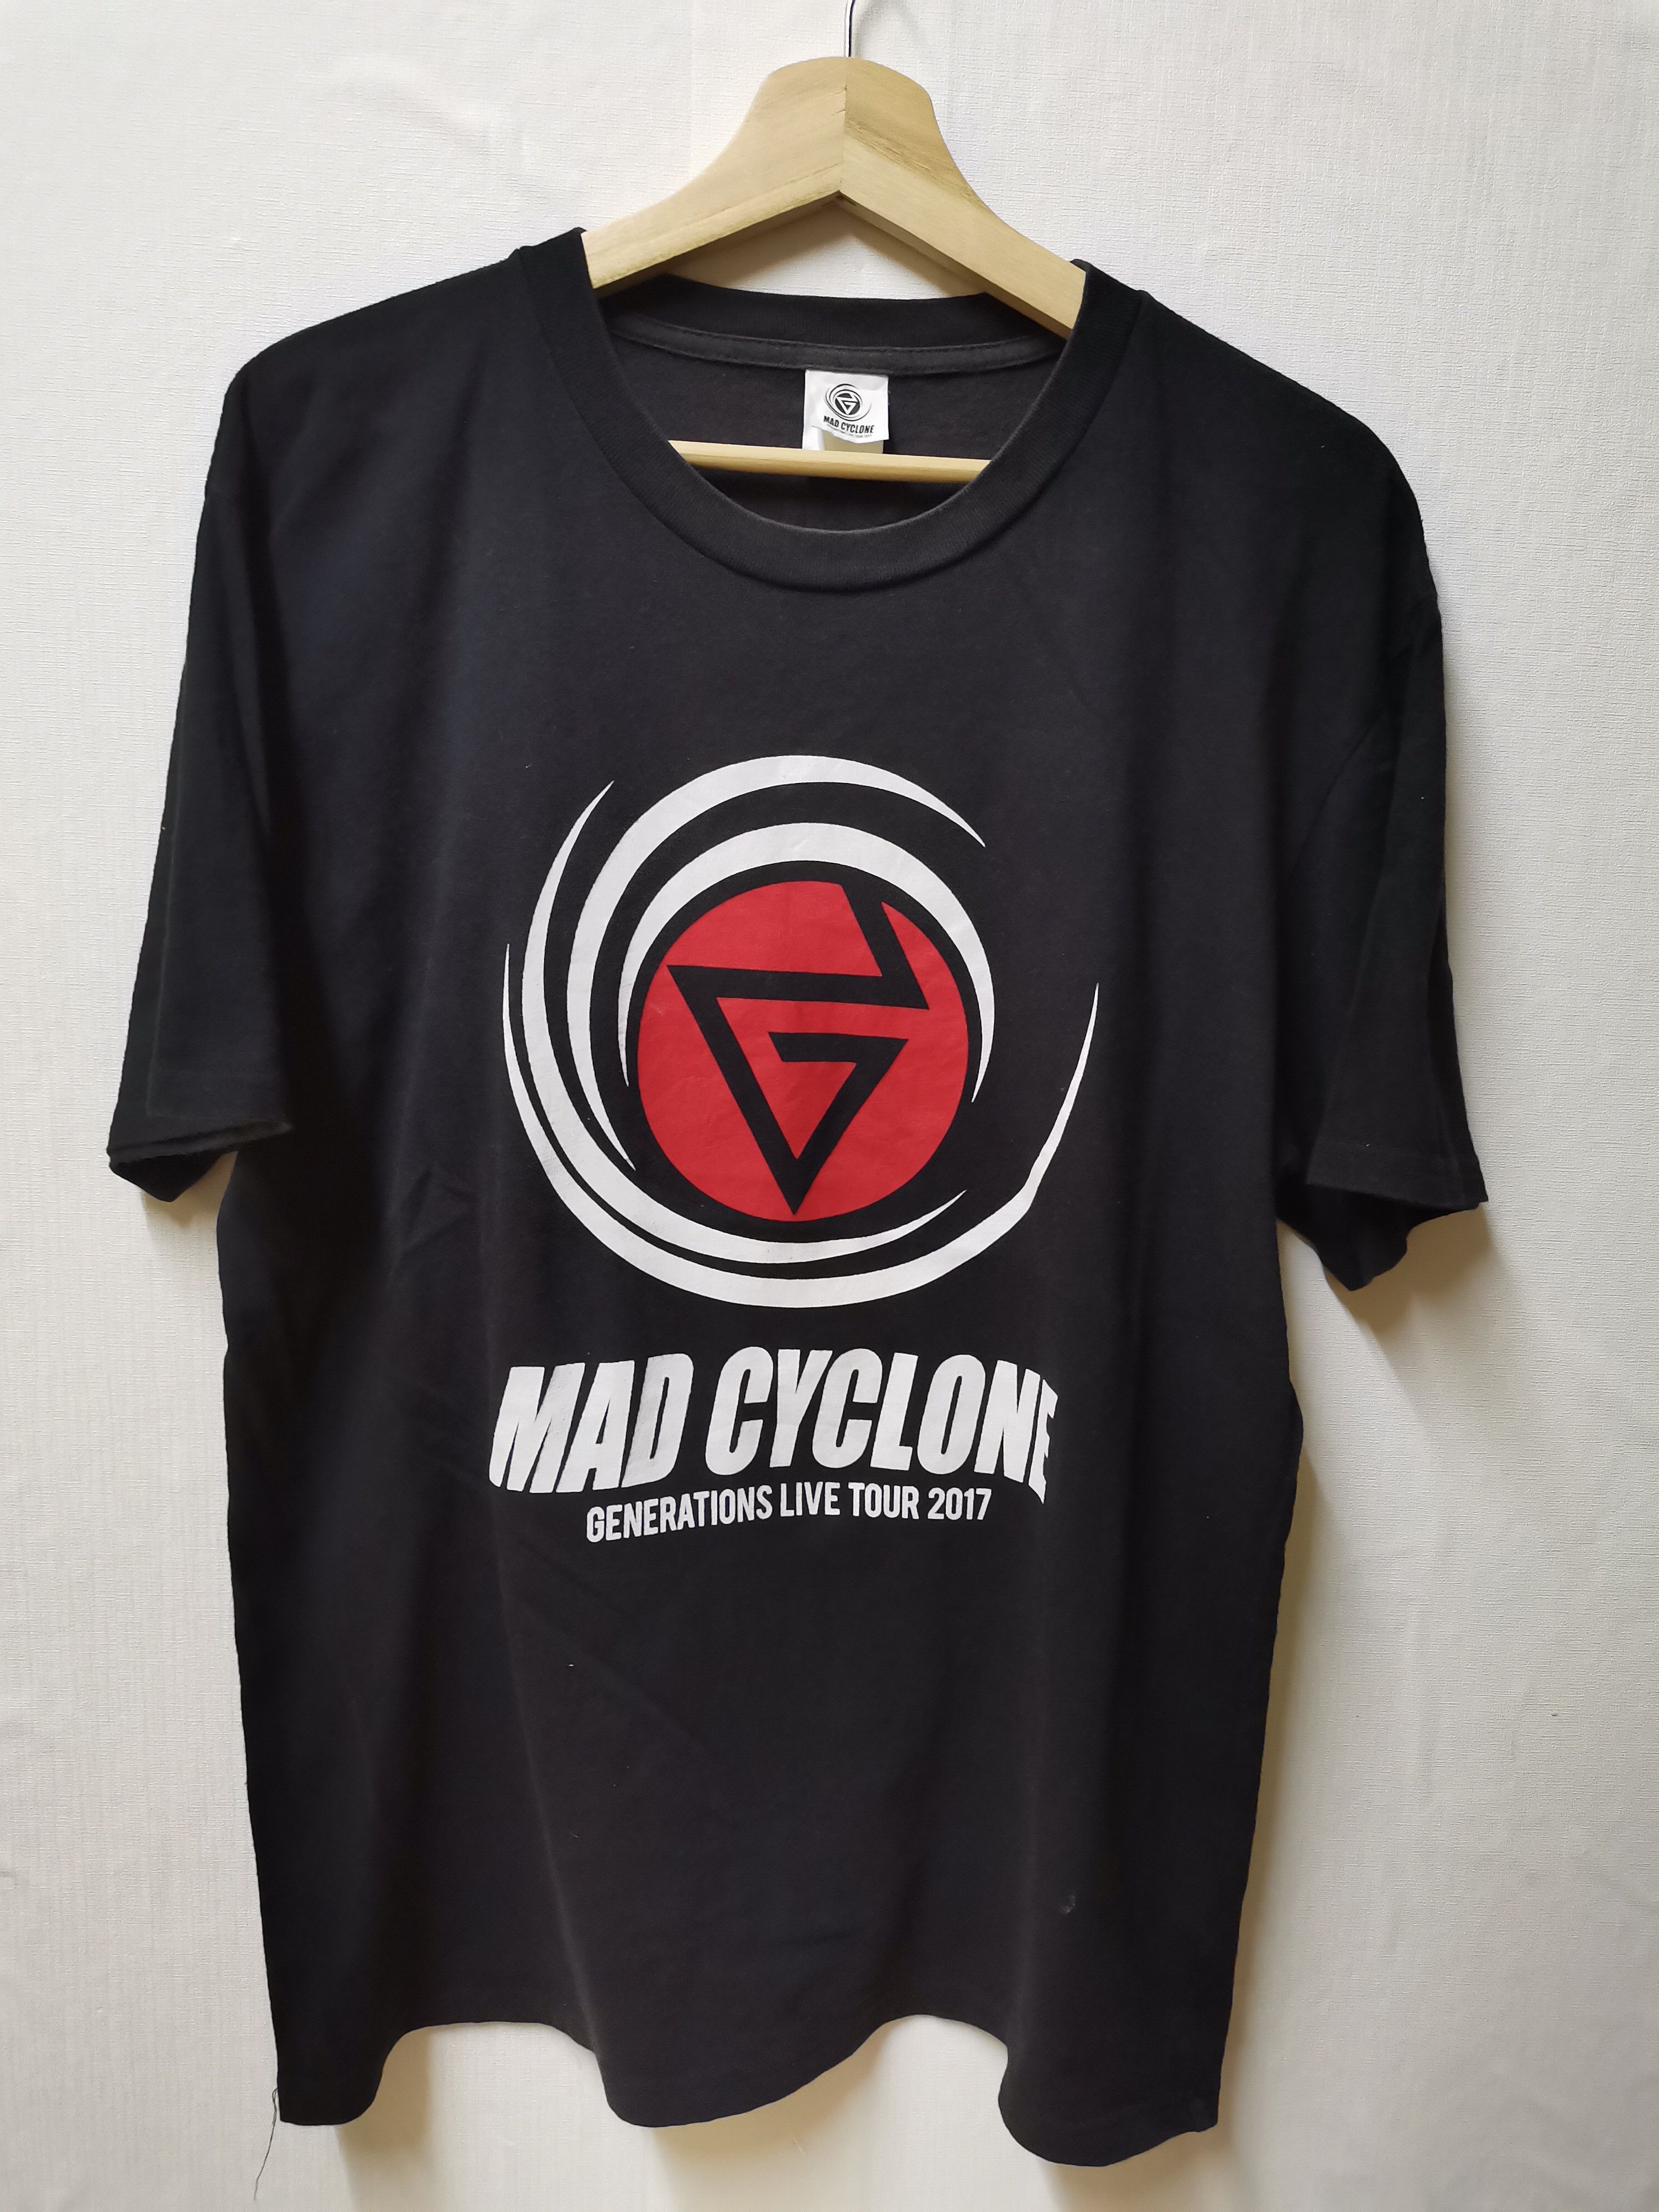 Japanese Brand GENERATIONS LIVE TOUR 2017 MAD CYCLONE TSHIRT | Grailed